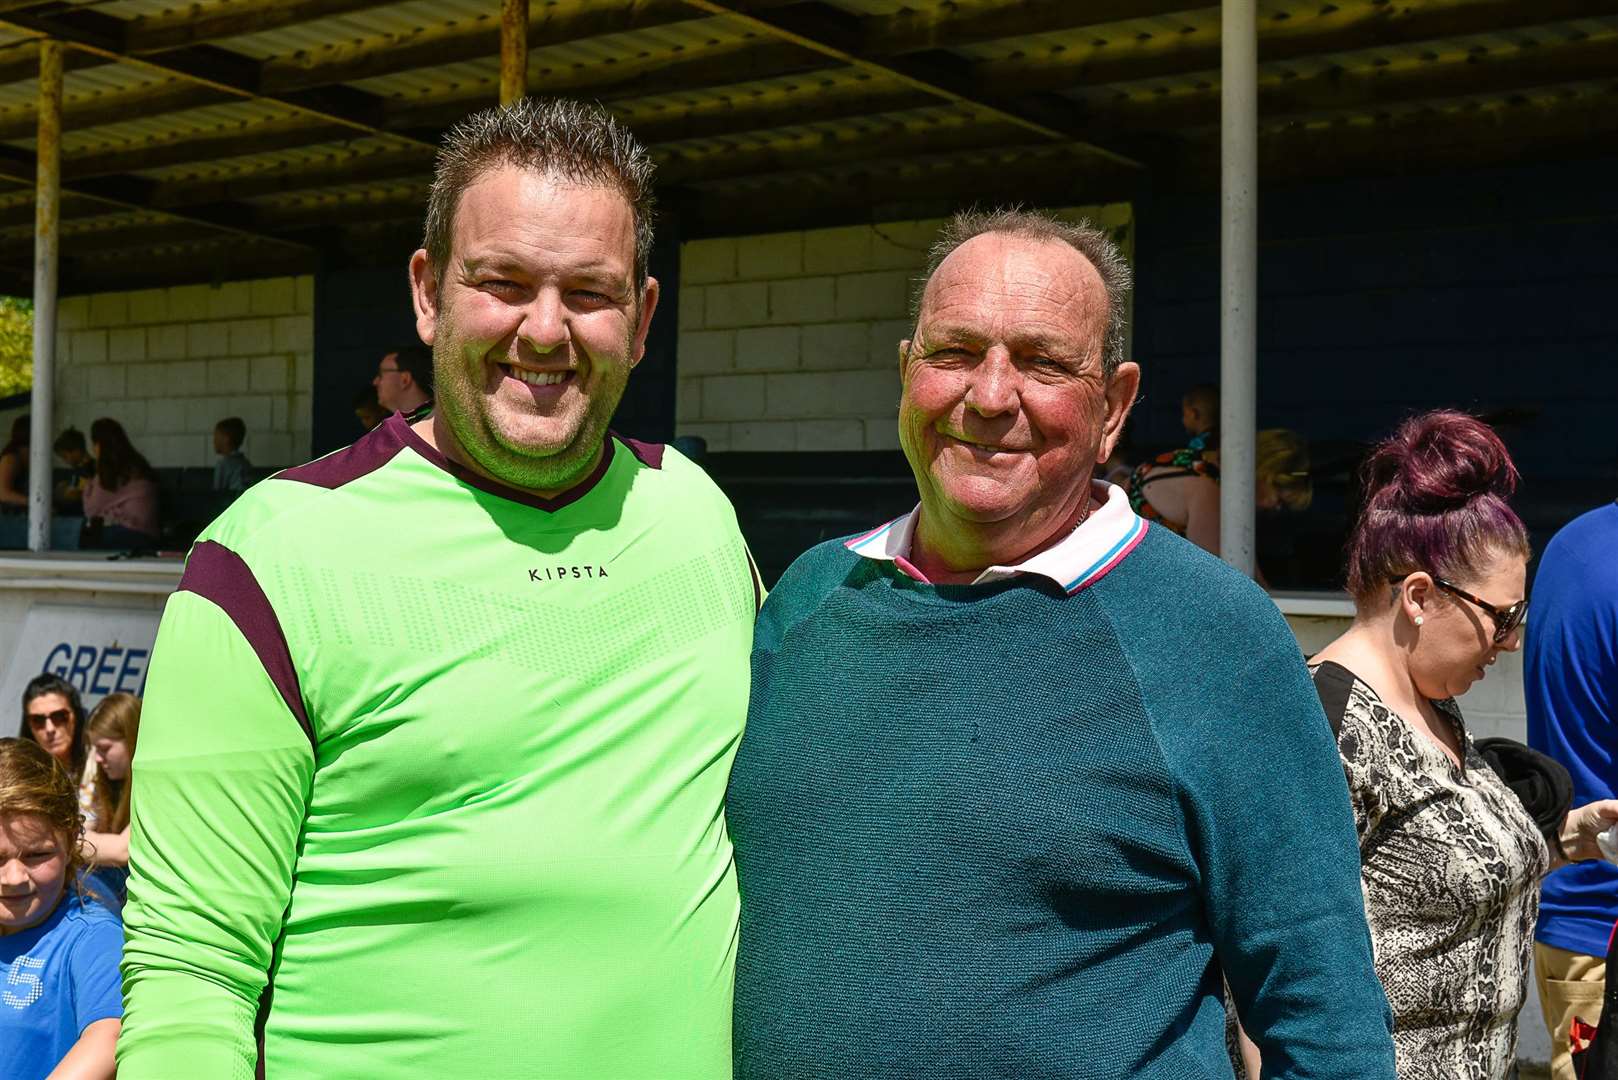 Daniel Parry and his father, Allan Parry at the Allan's Allstars v Kay FC charity football match on behalf of MacMillan Cancer Support. Picture: Tony Jones (11139331)